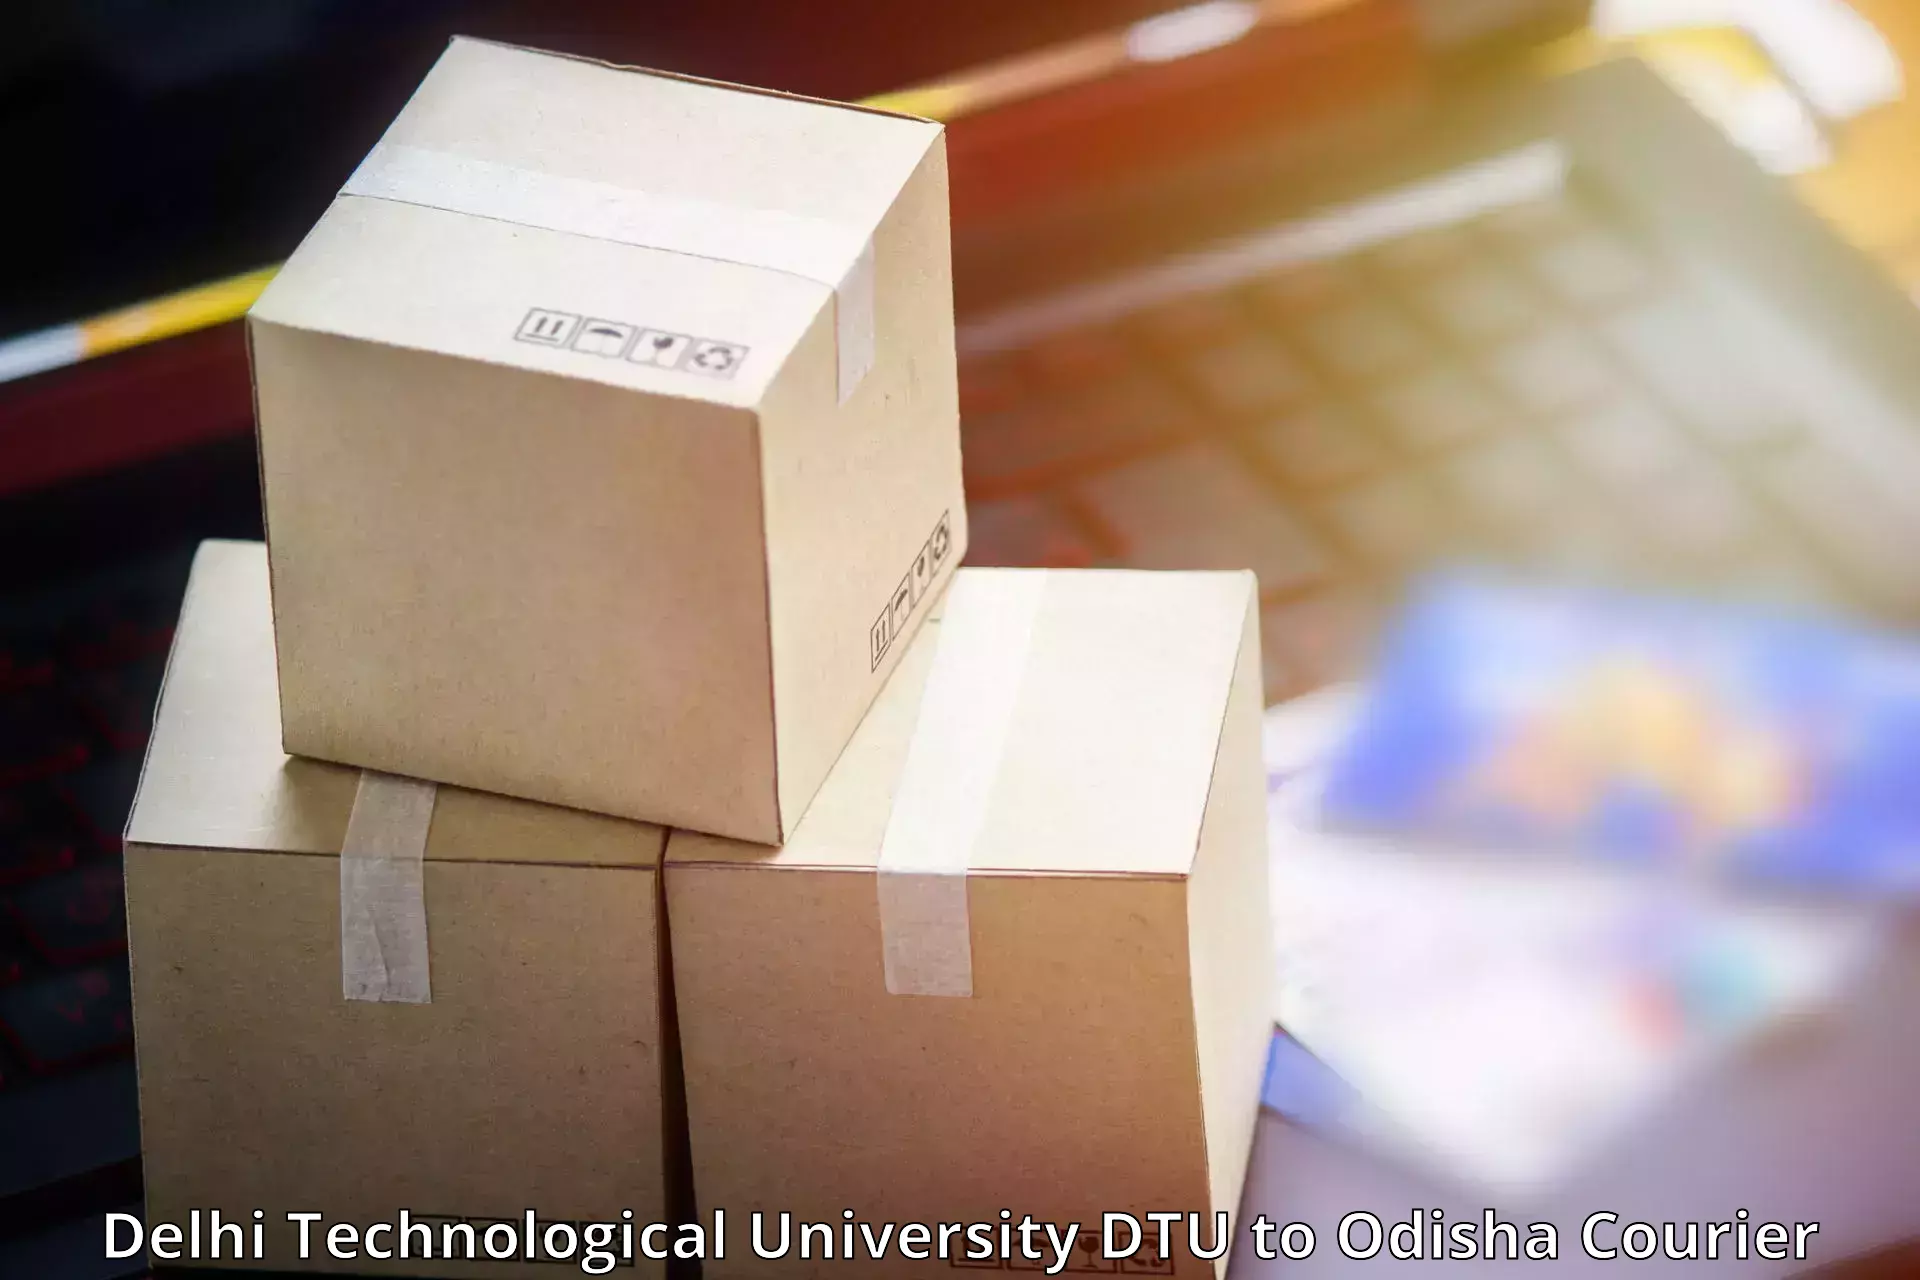 Expedited shipping solutions Delhi Technological University DTU to Odisha